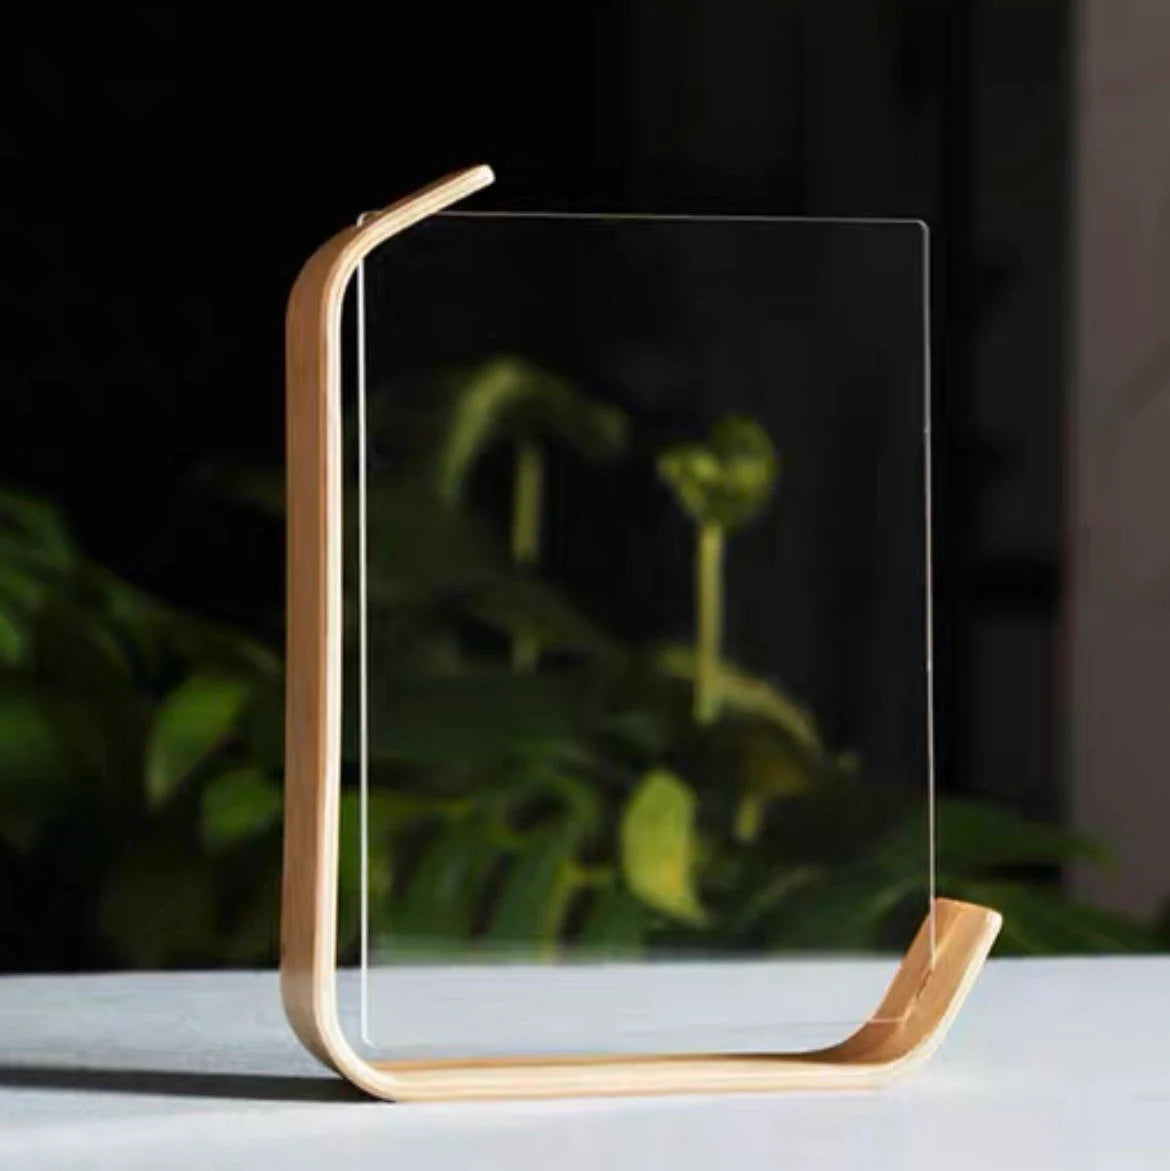 Eco-Friendly Bamboo Cozy Picture Frames